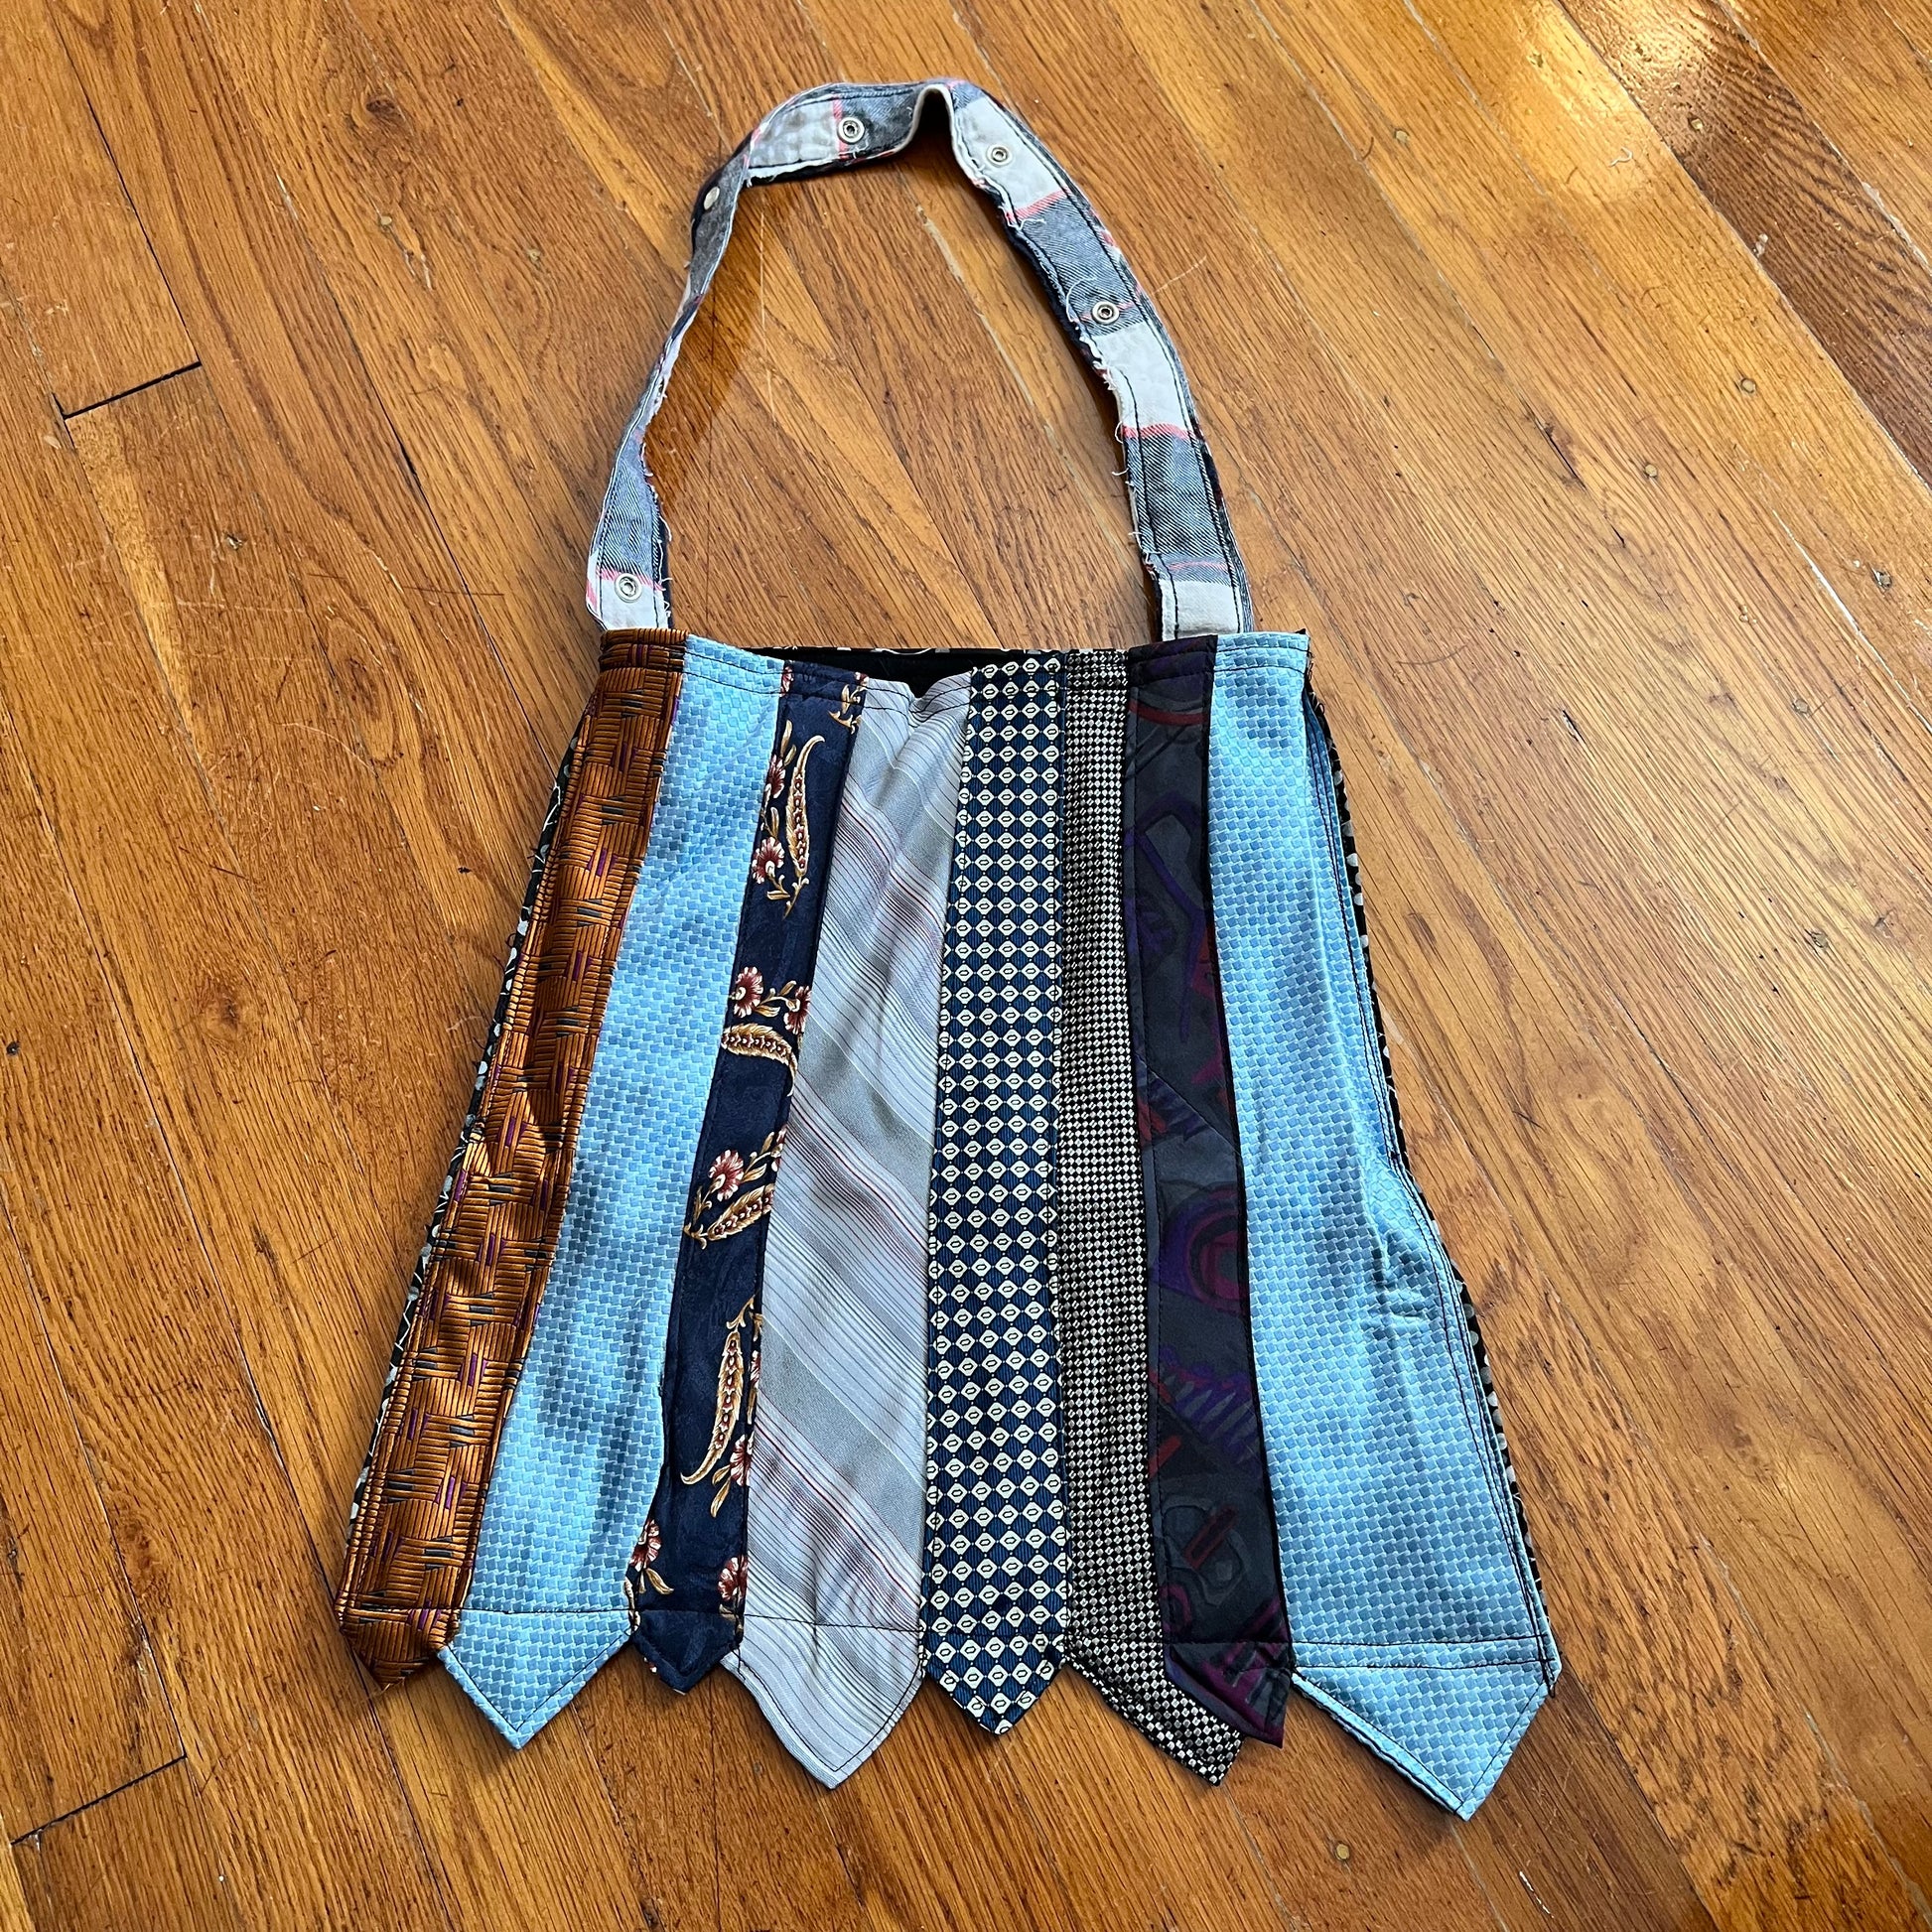 Tote bag created out of neckties in light blues, patterns, gold. wood floor background